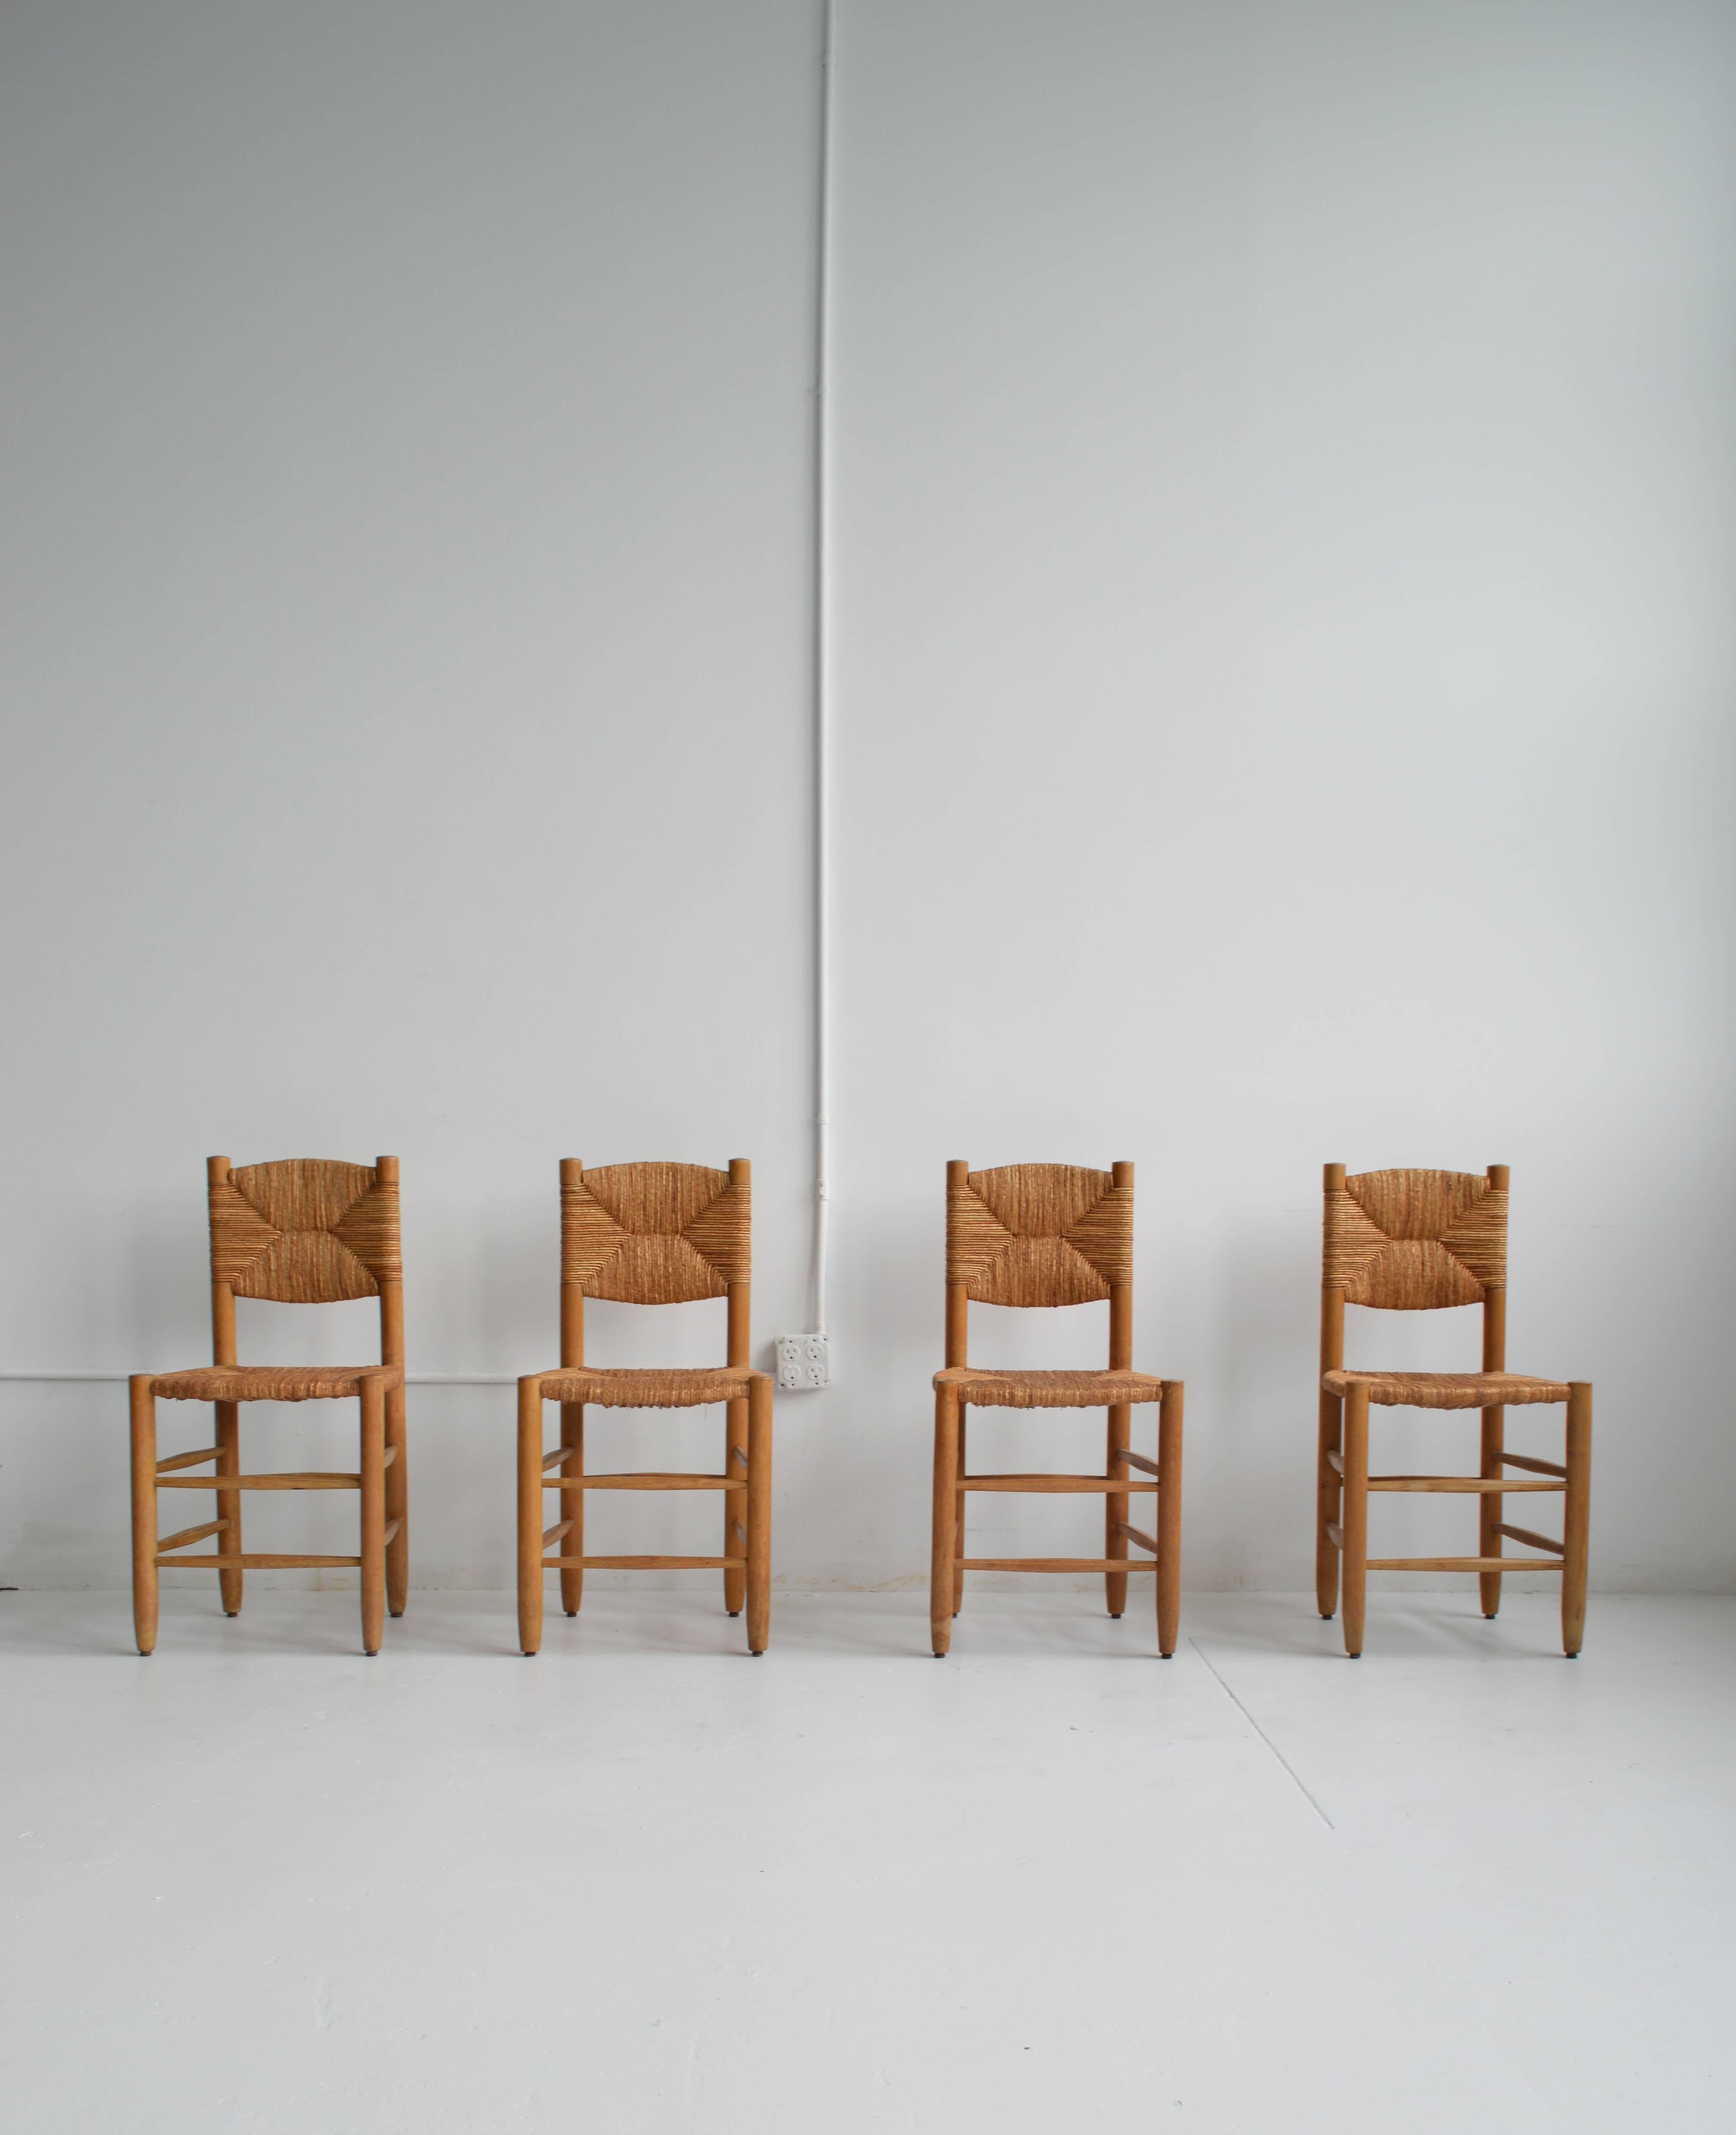 Set of four solid ashwood and rush straight-backed dining chairs by iconic French modern designer, Charlotte Perriand. These chairs achieve a striking balance of relaxed and refined design. The set is in good vintage condition with a beautiful